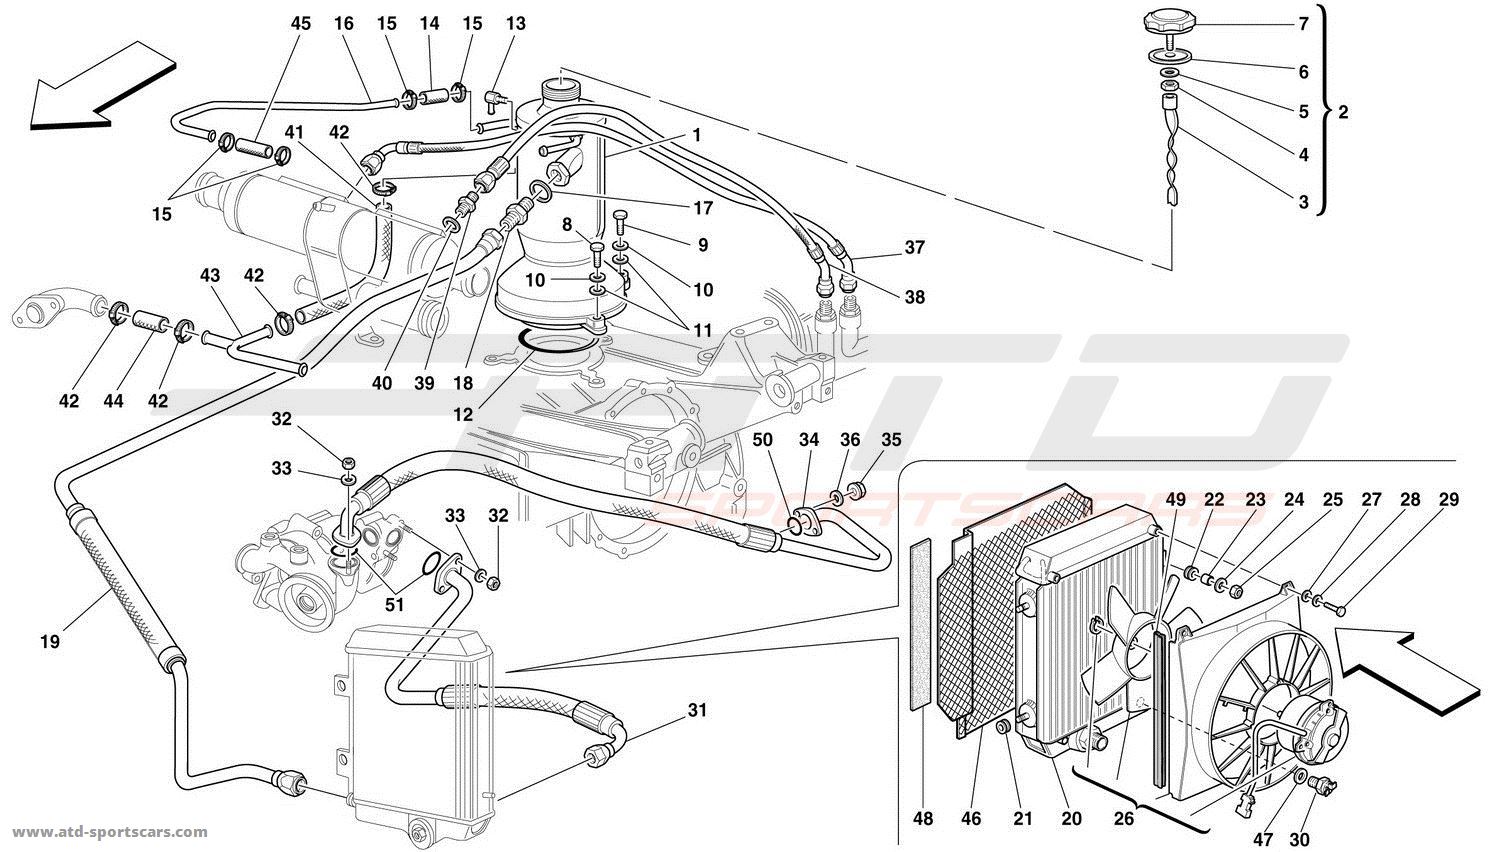 LUBRICATION SYSTEM - RADIATOR, BLOW-BY SYSTEM AND PIPES